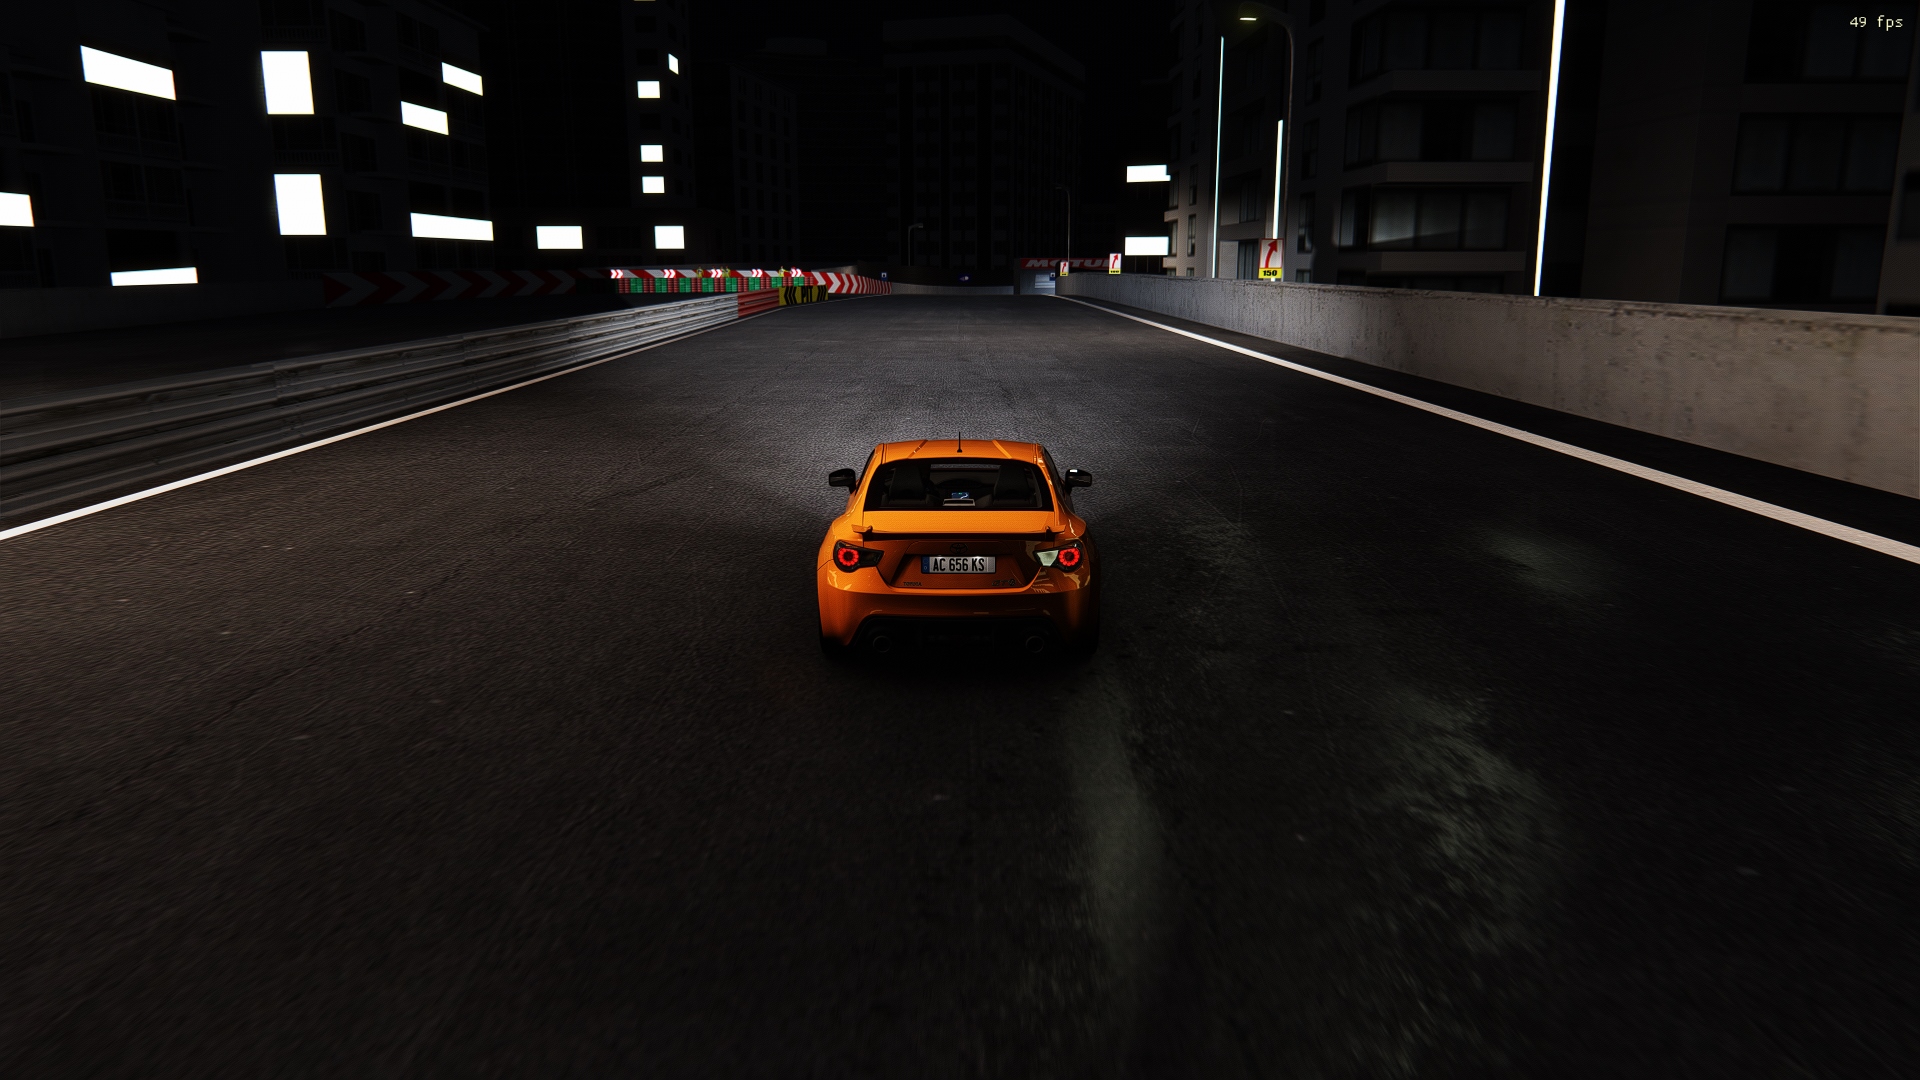 Screenshot_ks_toyota_gt86_special stage route 5_17-7-120-3-12-27.jpg